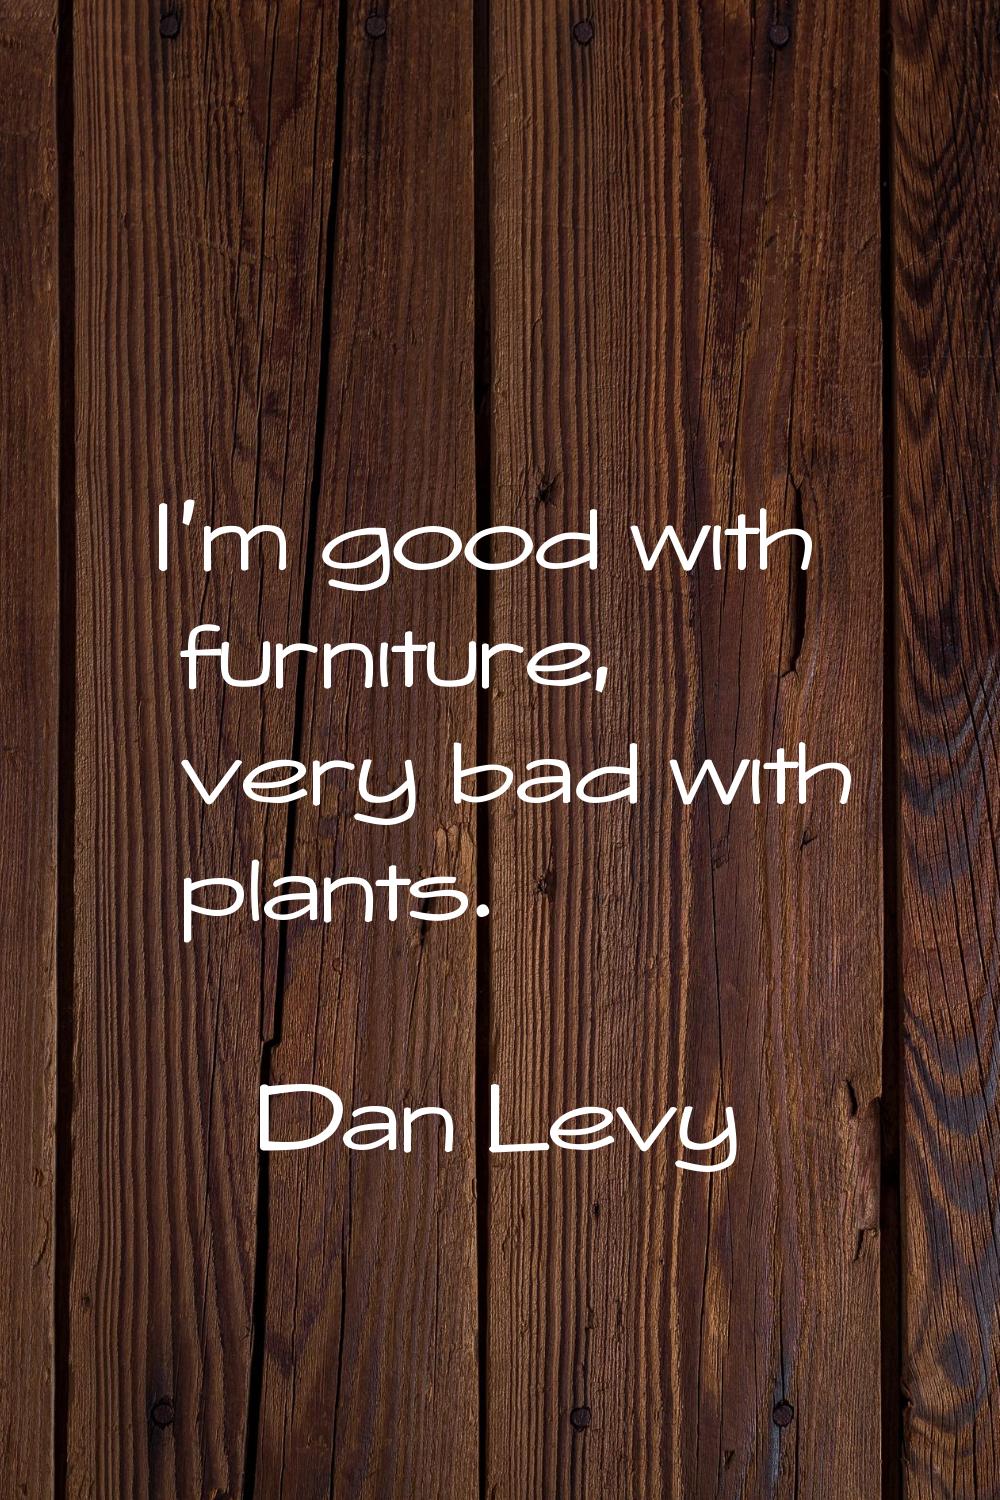 I'm good with furniture, very bad with plants.